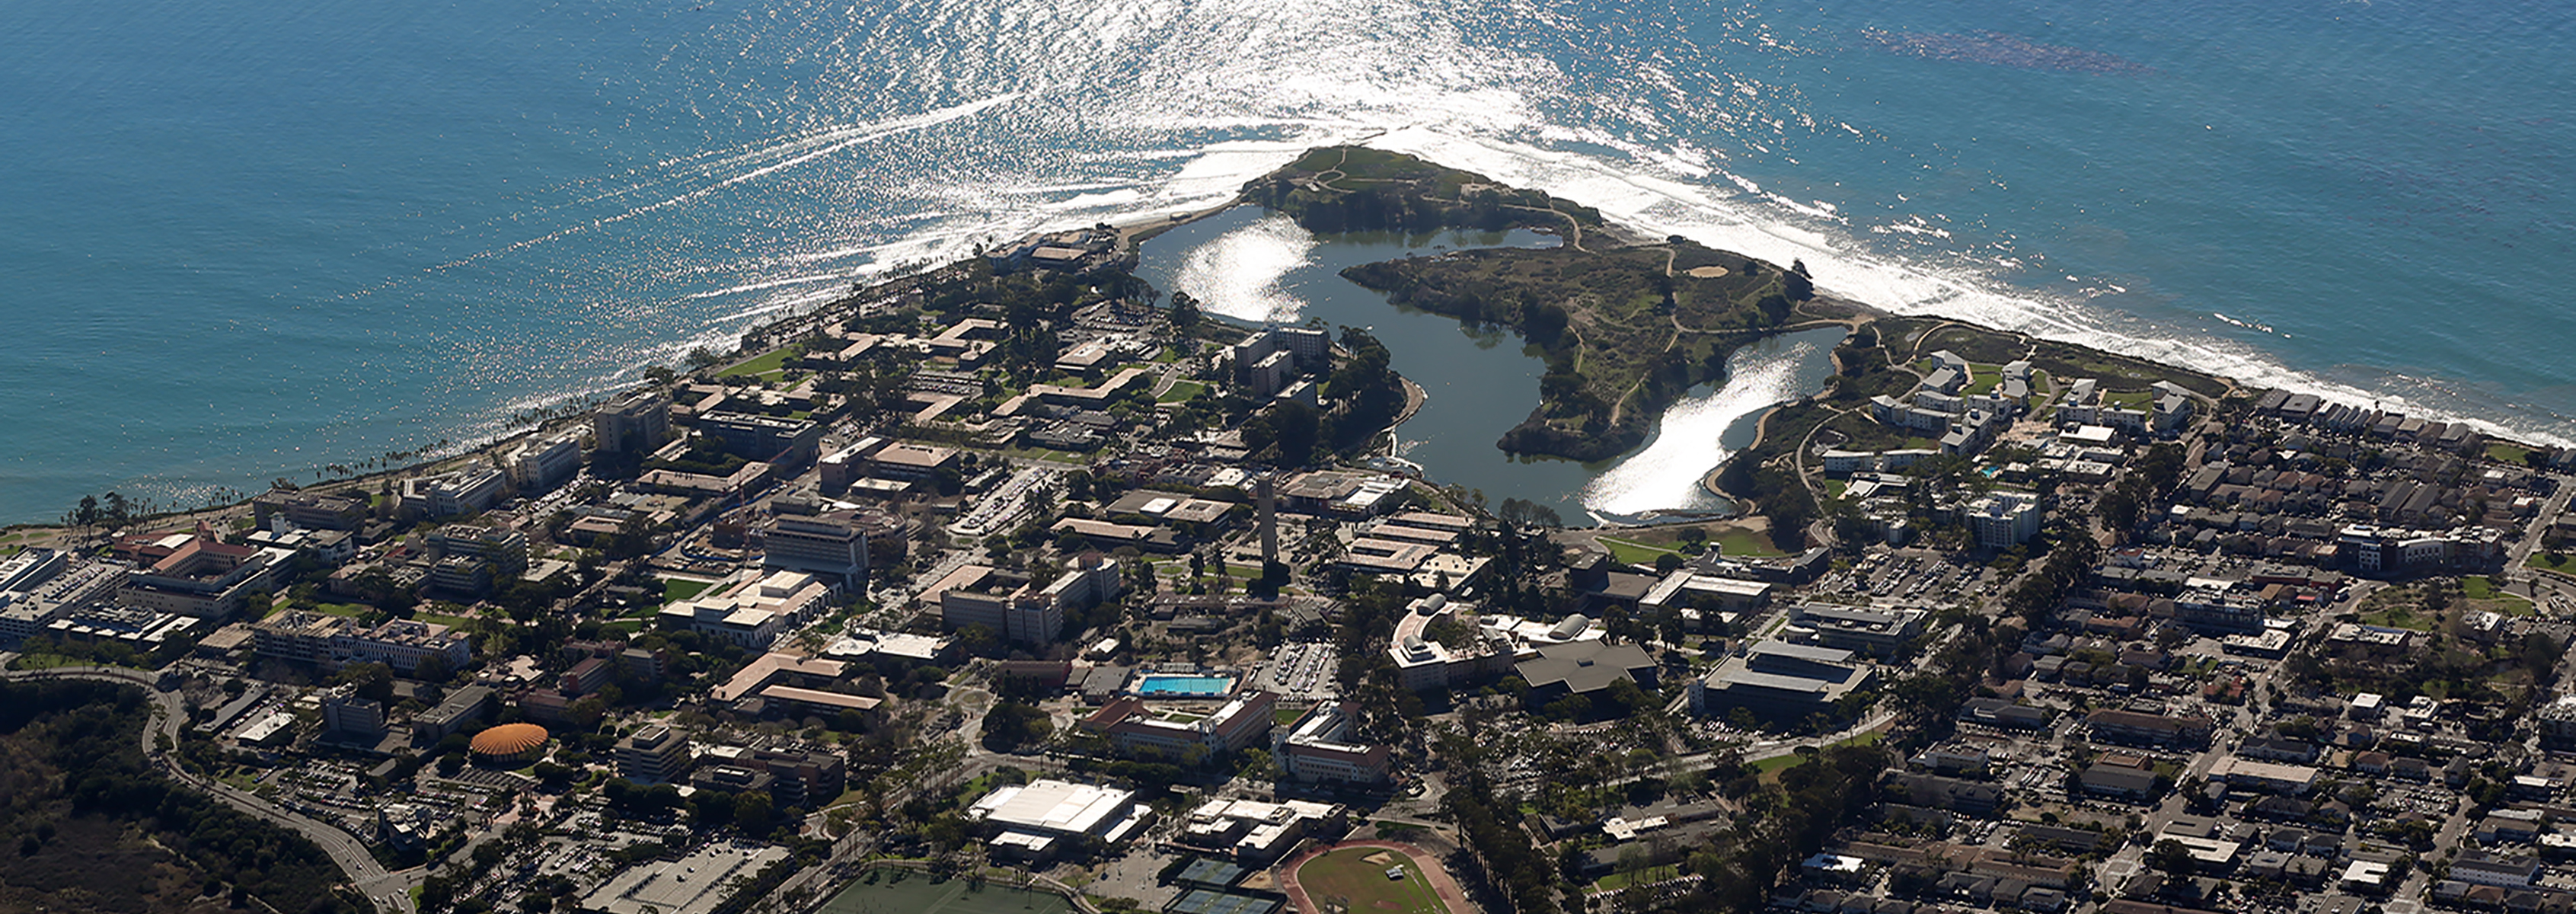 UCSB Campus Point sun reflecting ocean